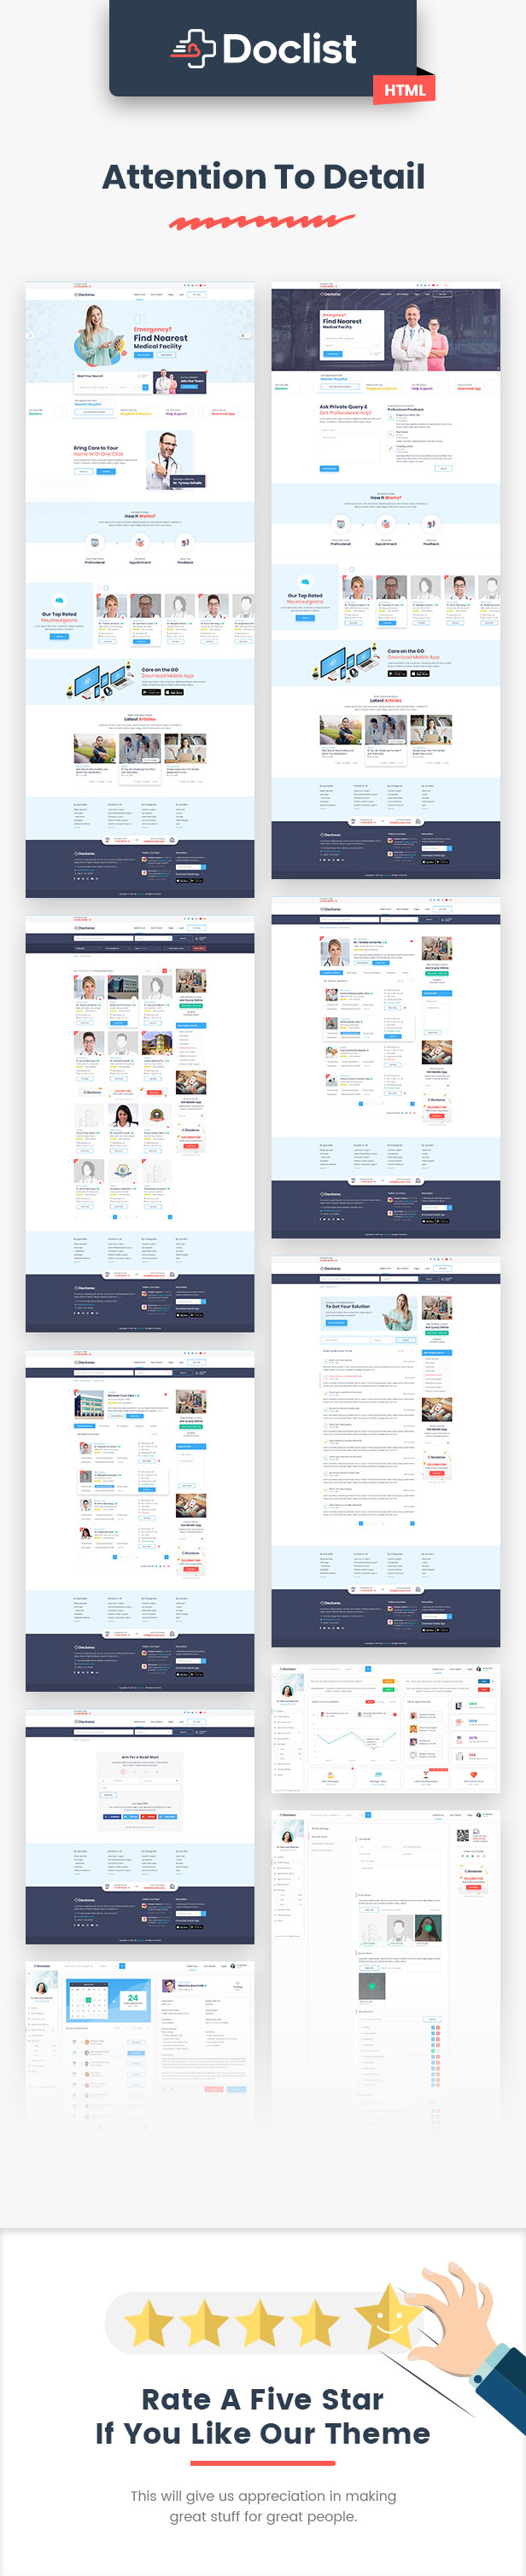 Doclist - Medical and Doctor Directory HTML Template - 4